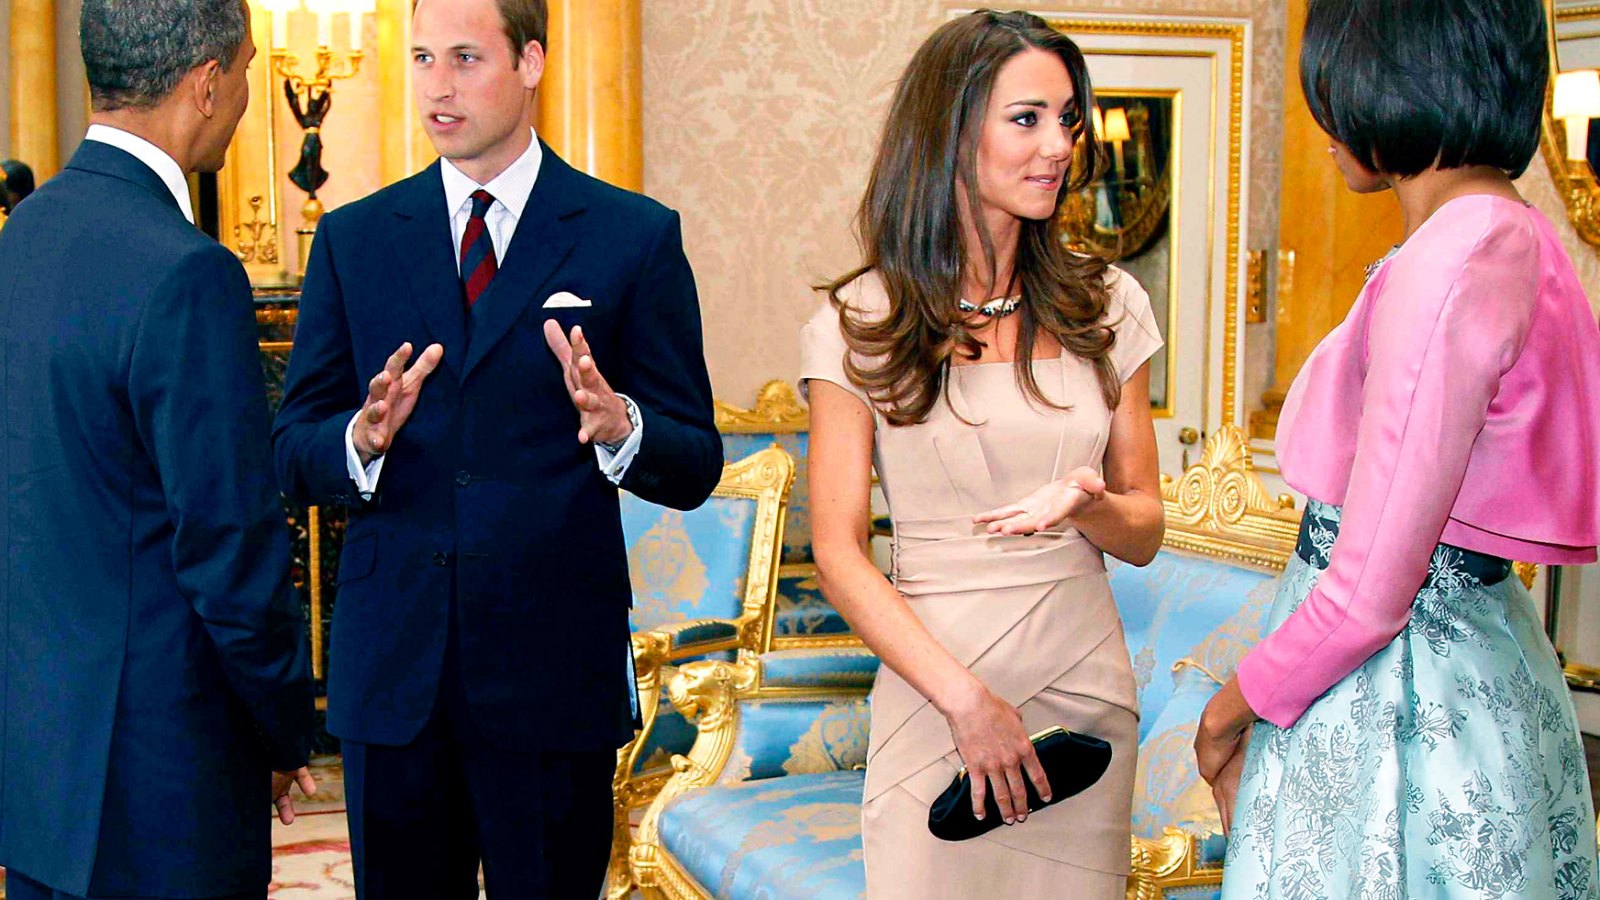 The Obamas congratulated Kate Middleton, Prince William on their baby.